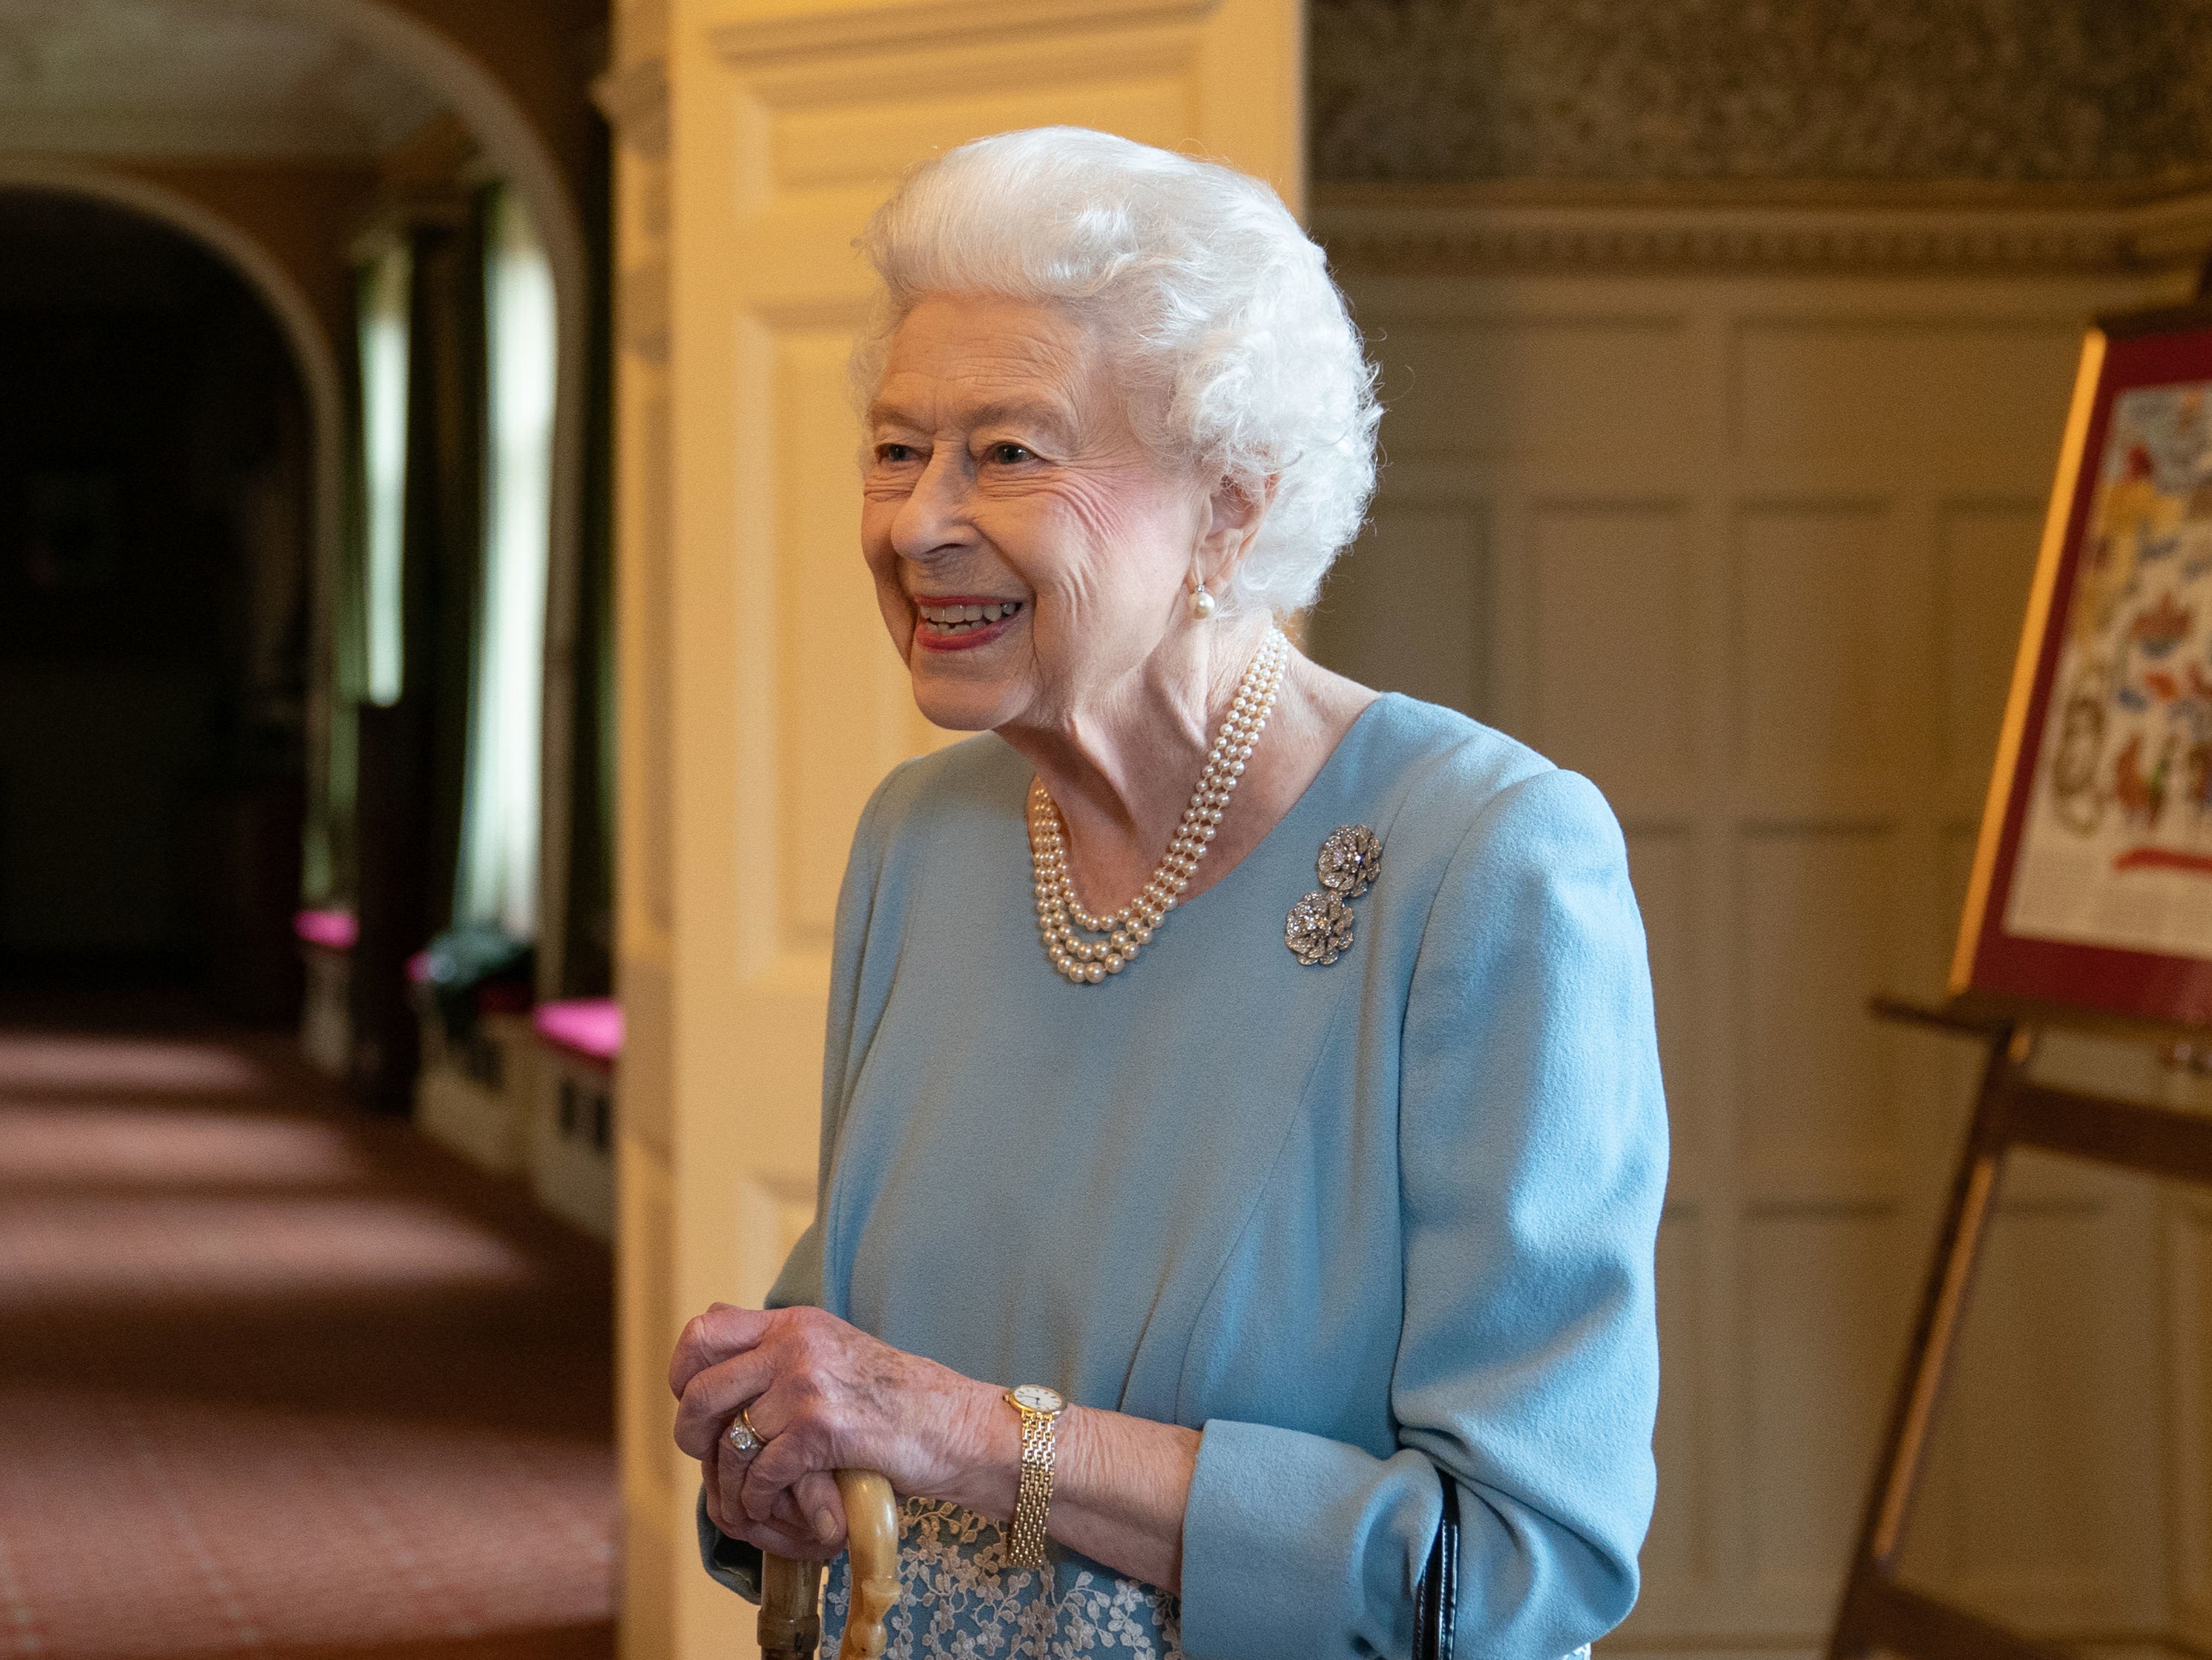 The Queen turned 96 earlier this month